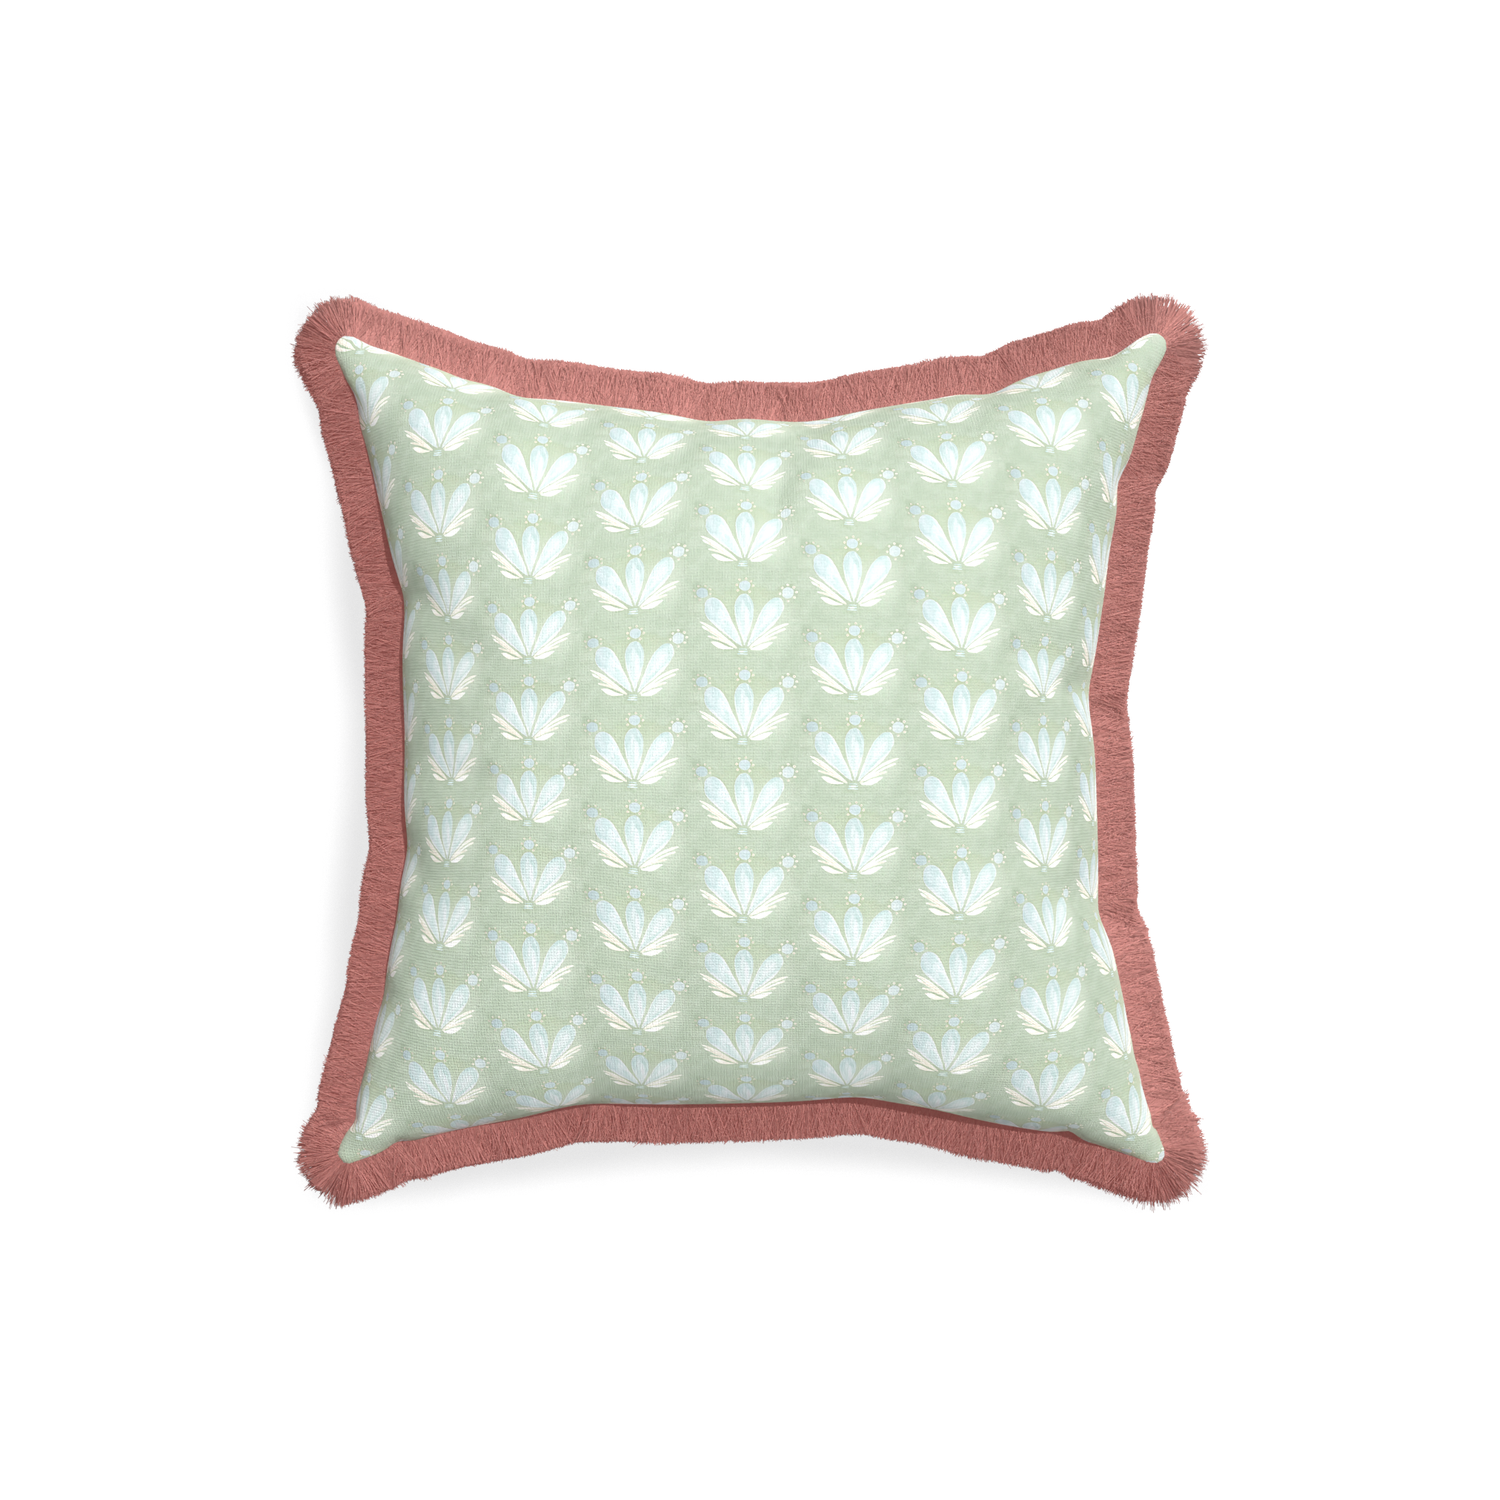 18-square serena sea salt custom blue & green floral drop repeatpillow with d fringe on white background